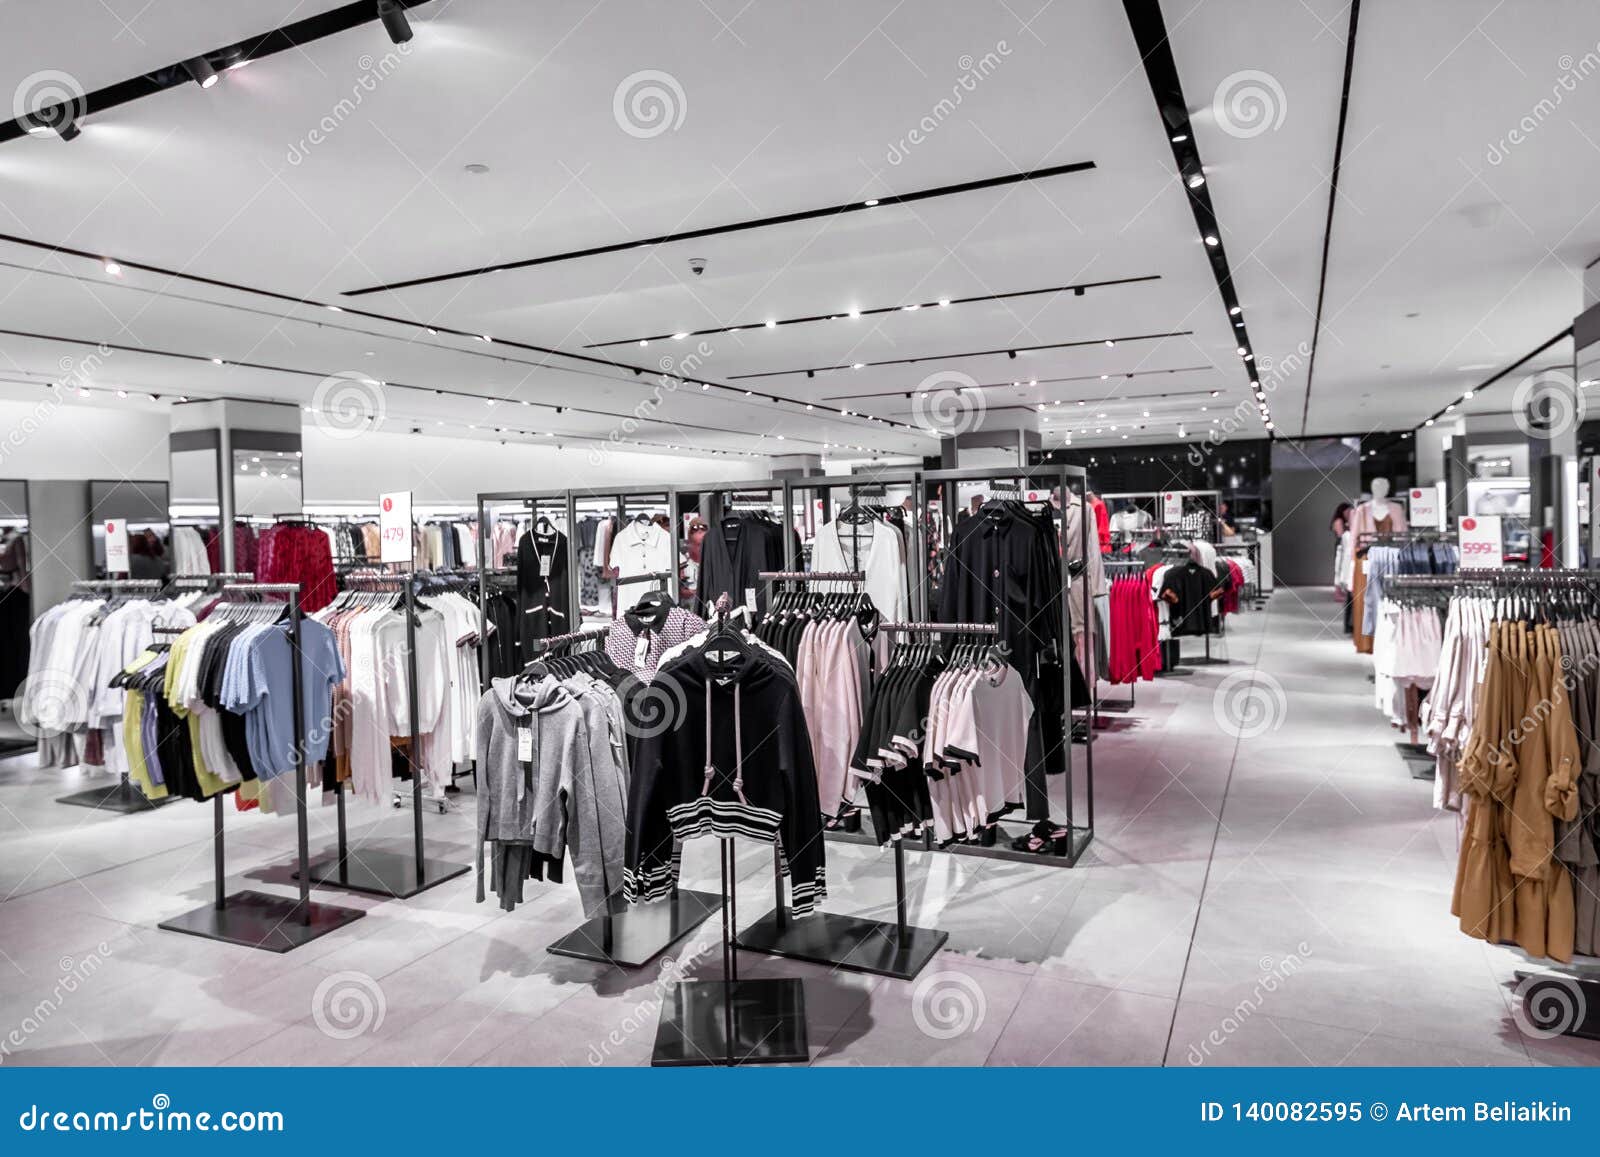 378 Fashion Island Shopping Mall Stock Photos - Free & Royalty-Free Stock  Photos from Dreamstime